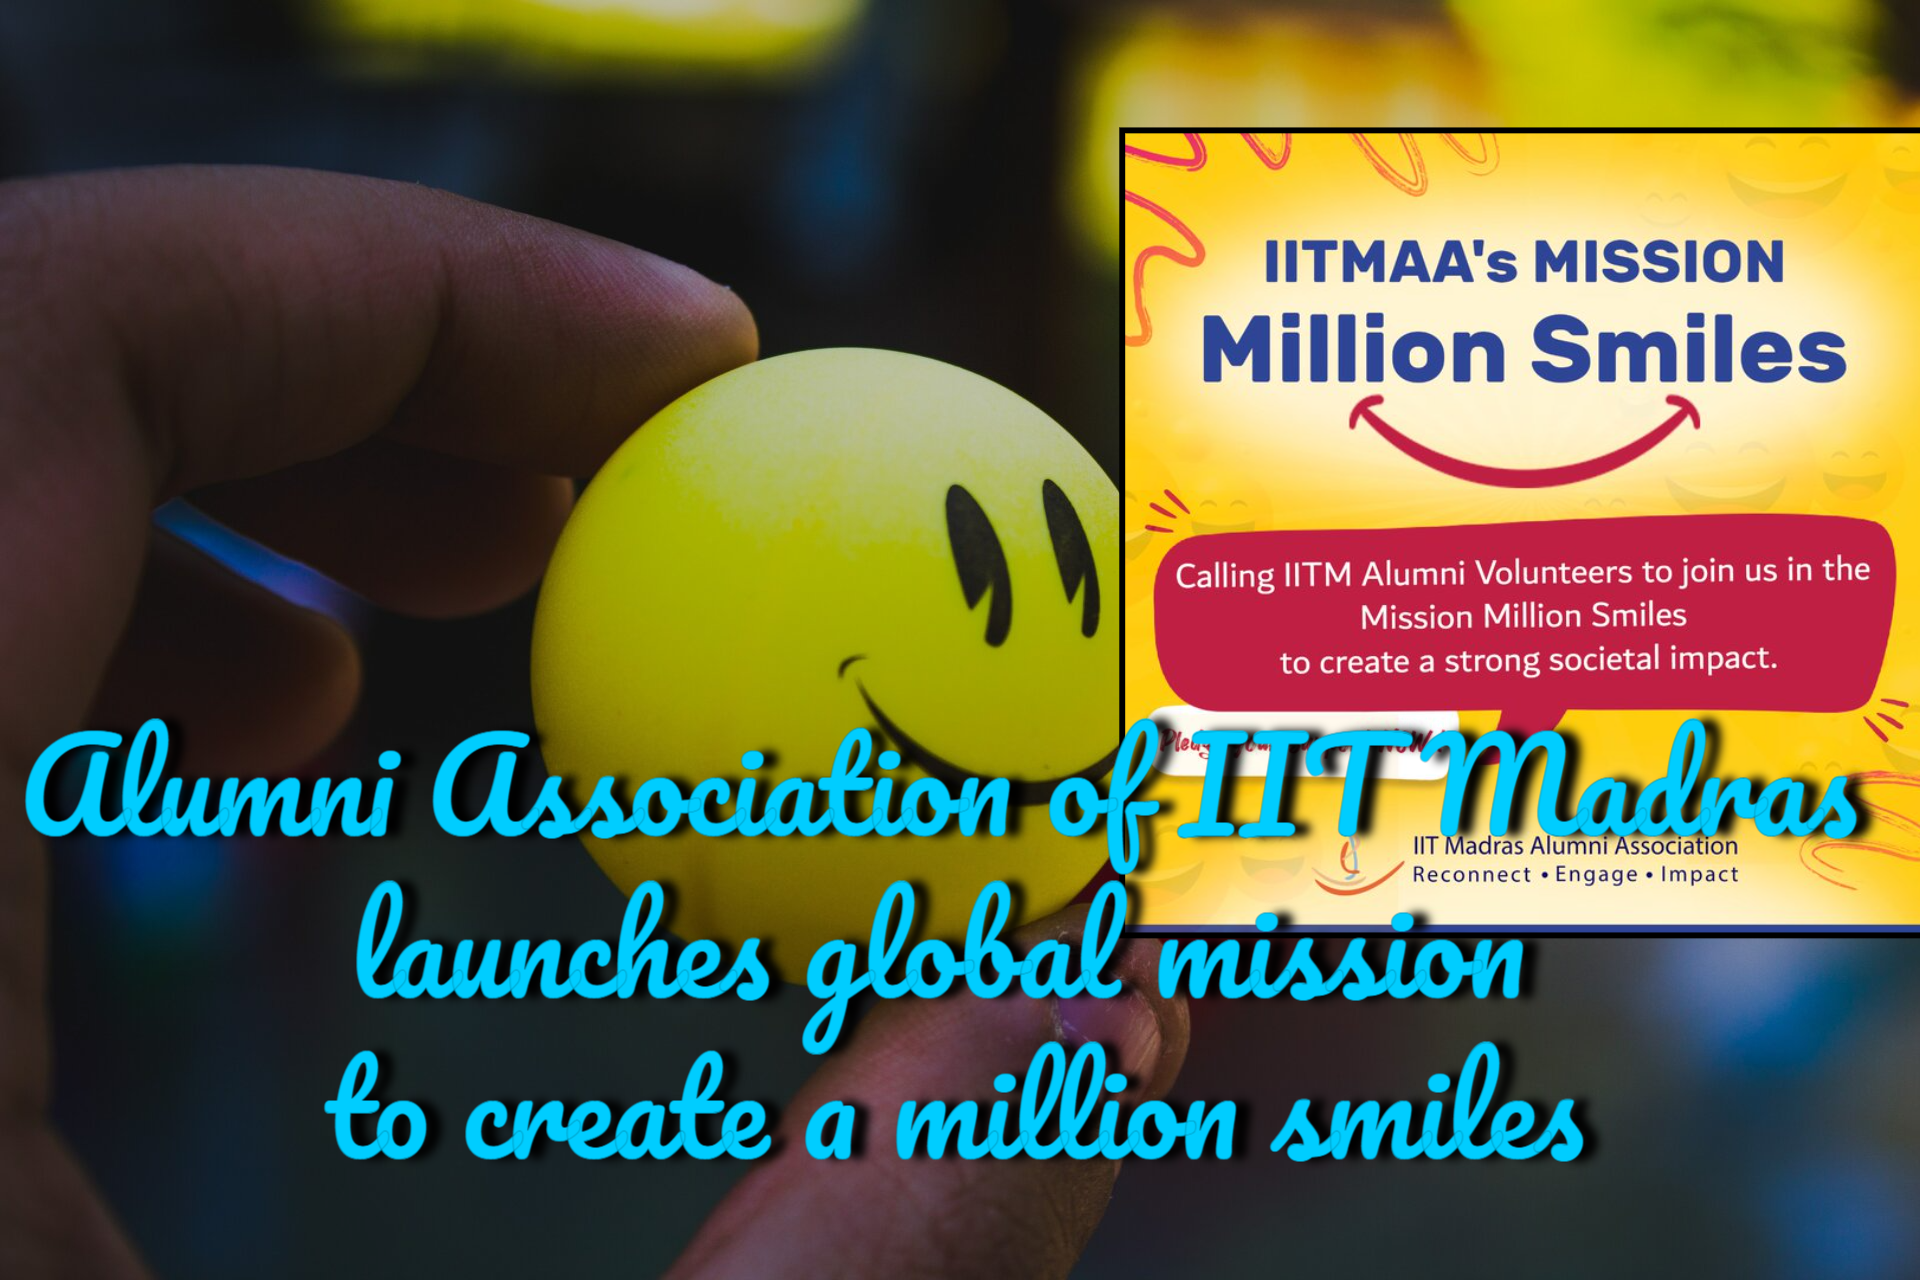 Alumni Association of IIT Madras launches global mission to create a million smiles